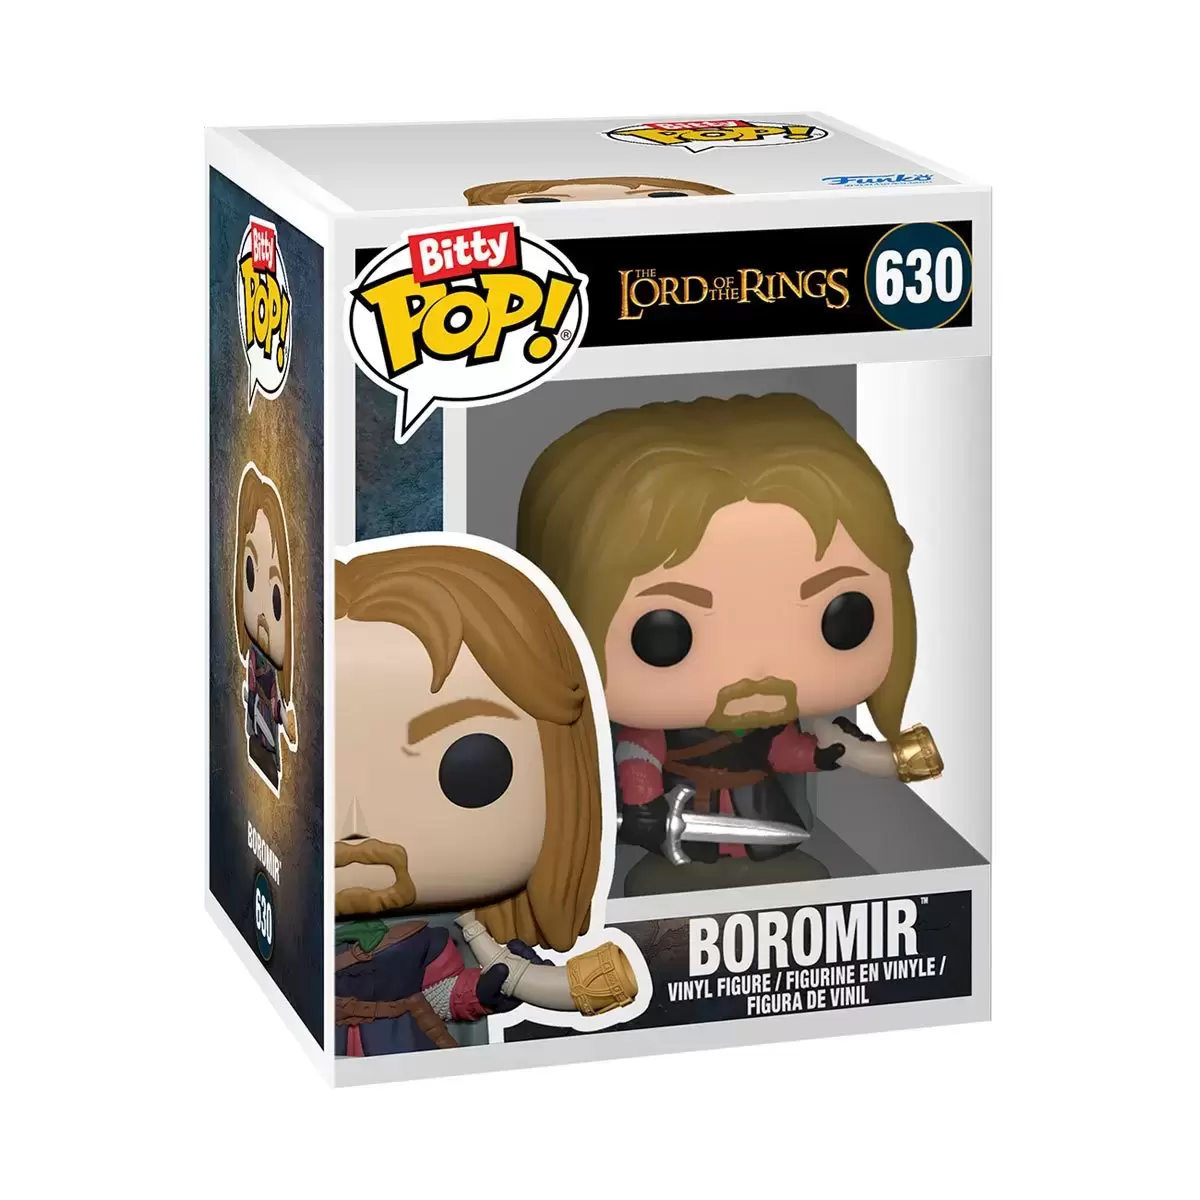 Bitty POP! - Lord of The Rings - Boromir